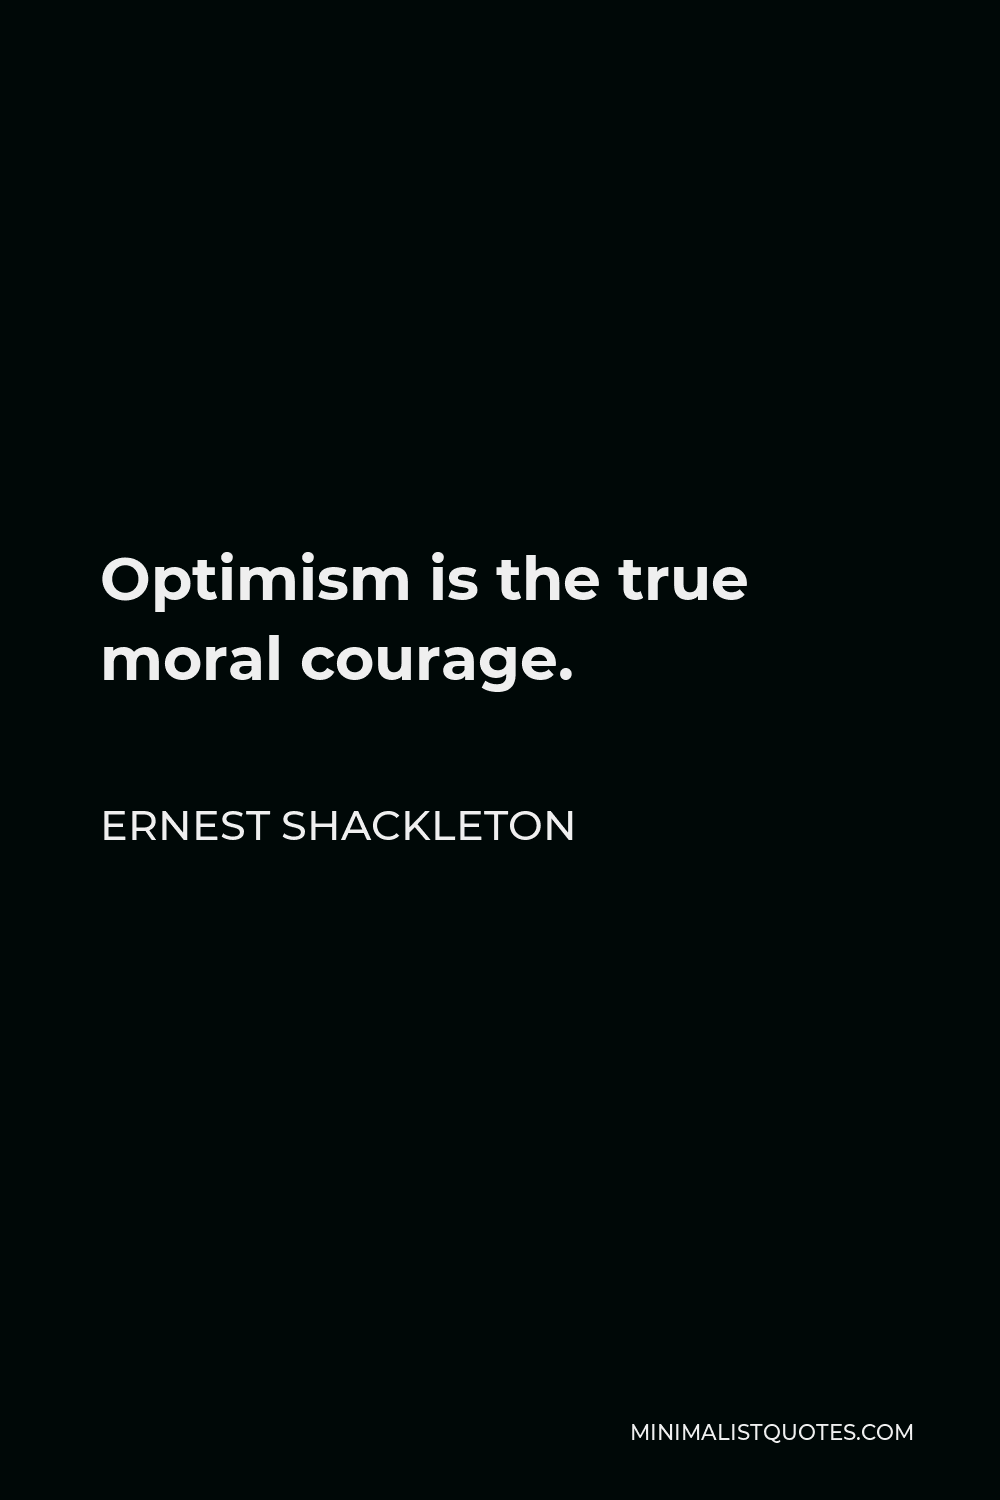 Ernest Shackleton Quote - Optimism is the true moral courage.